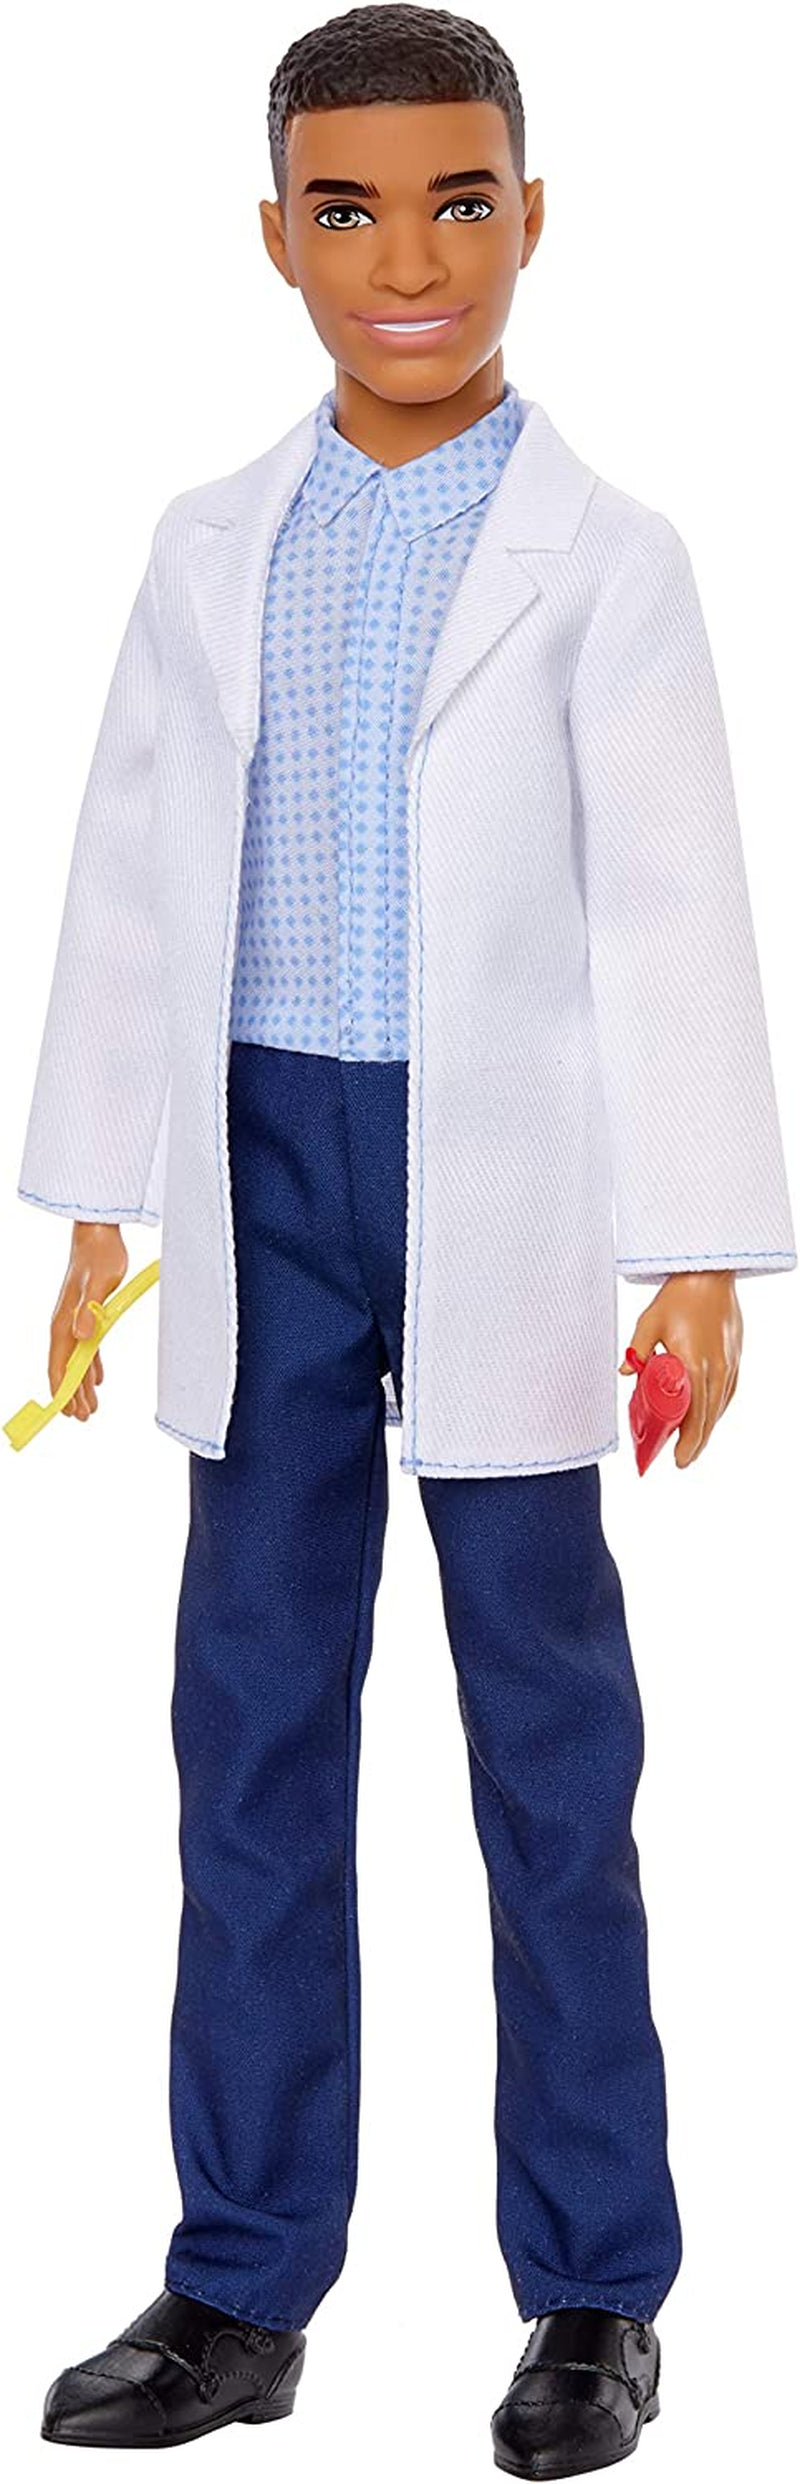 Ken Brunette Dentist Doll with Professional Dental Coat plus 2 Dental Toothbrush and Toothpaste Accessories for Ages 3 and Up